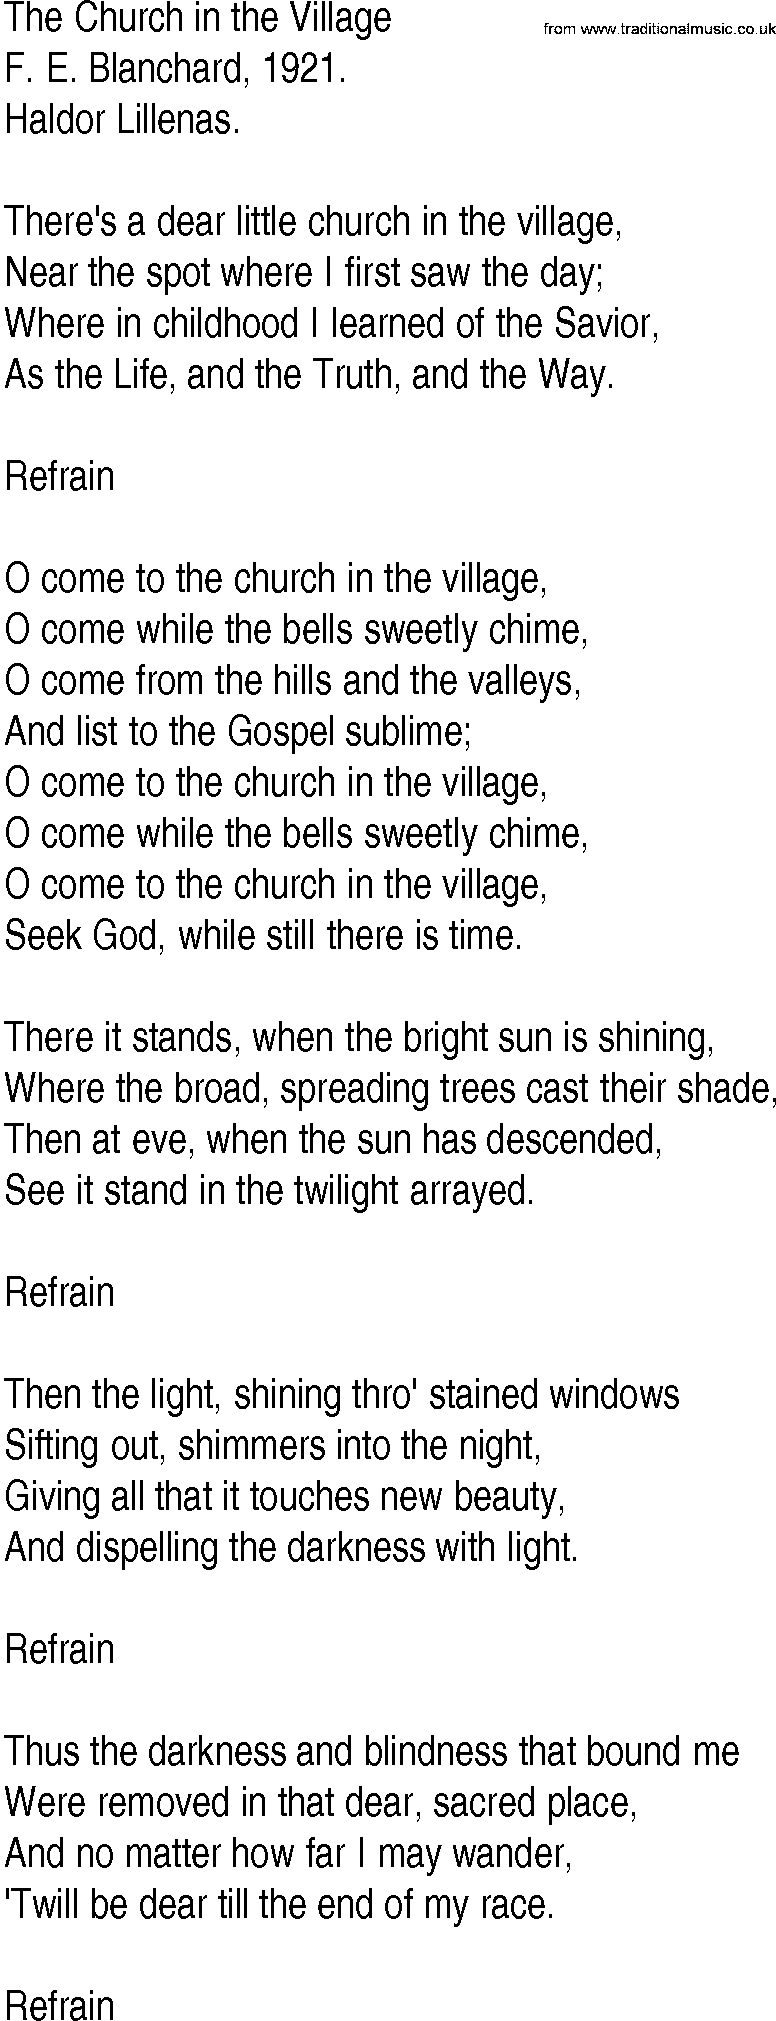 Hymn and Gospel Song: The Church in the Village by F E Blanchard lyrics